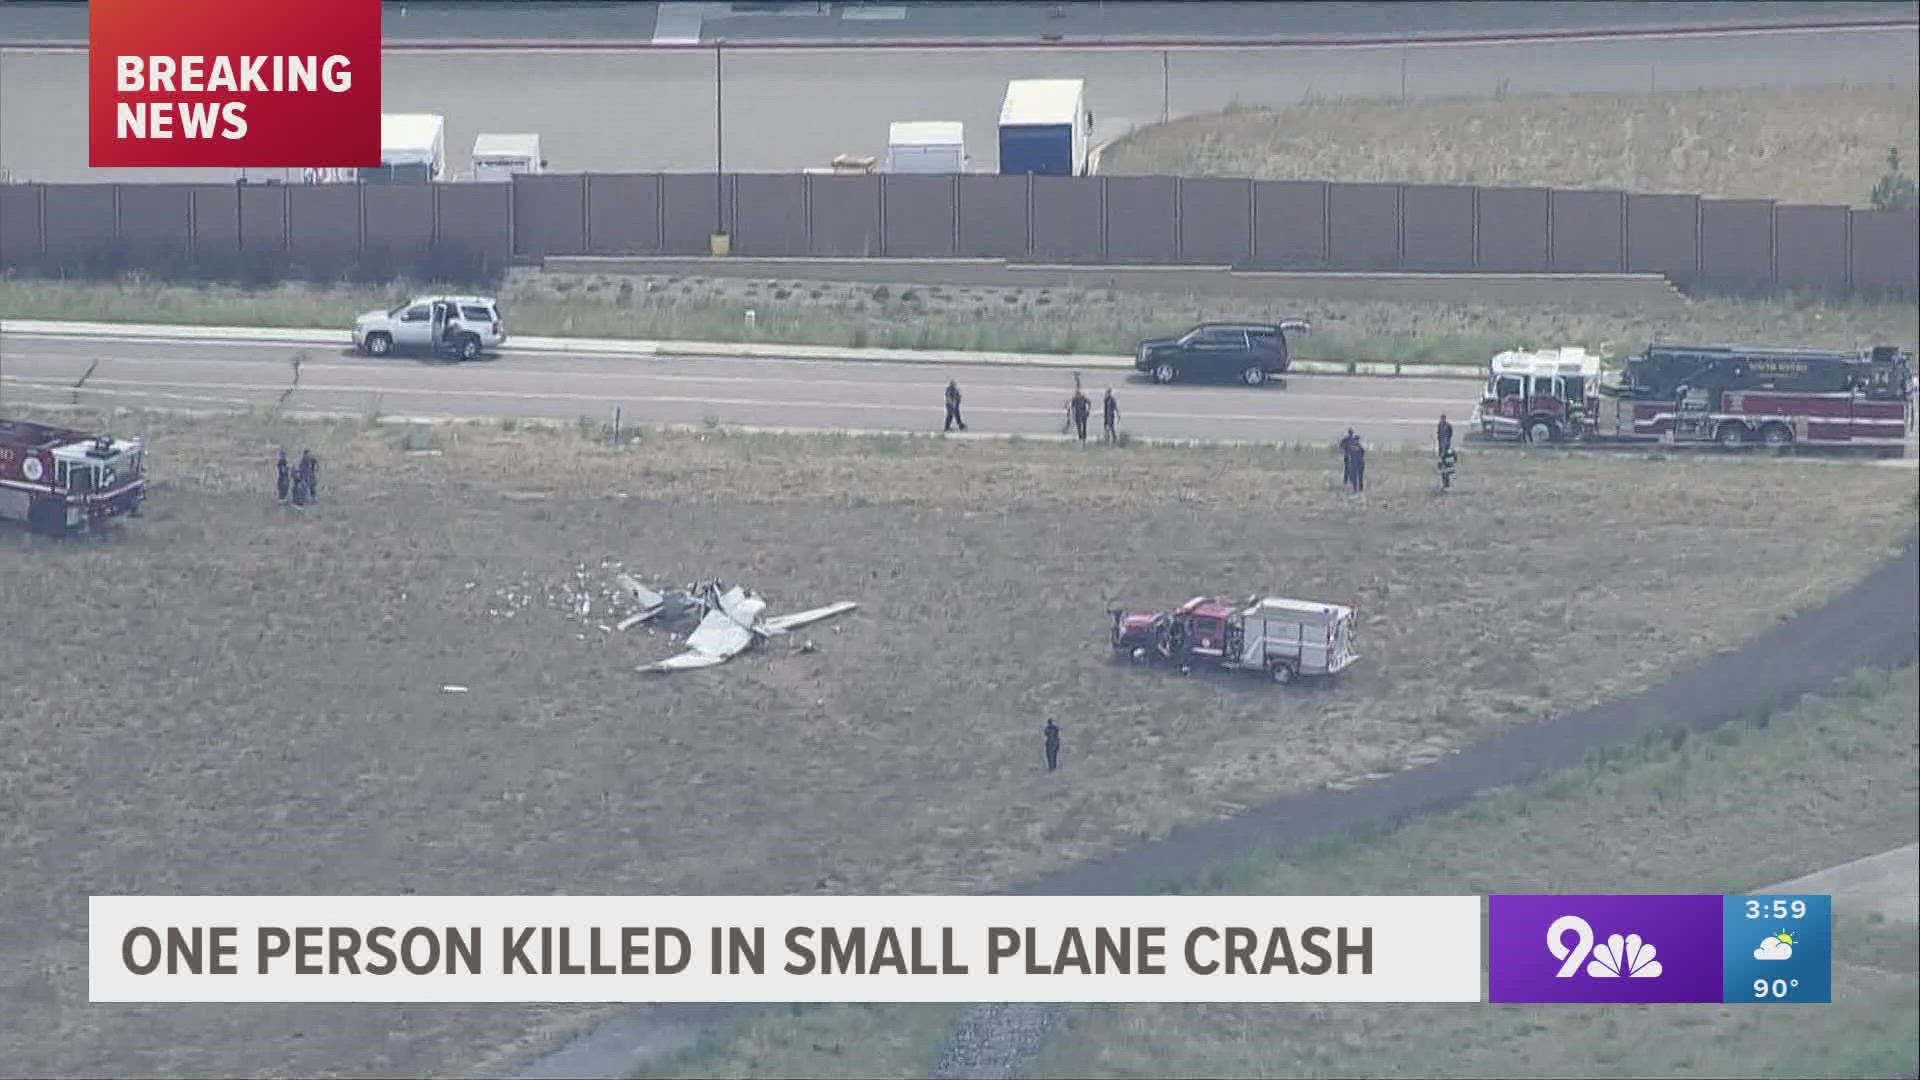 The single-engine plane crashed in an open field seconds after departure from the airport, according to authorities.